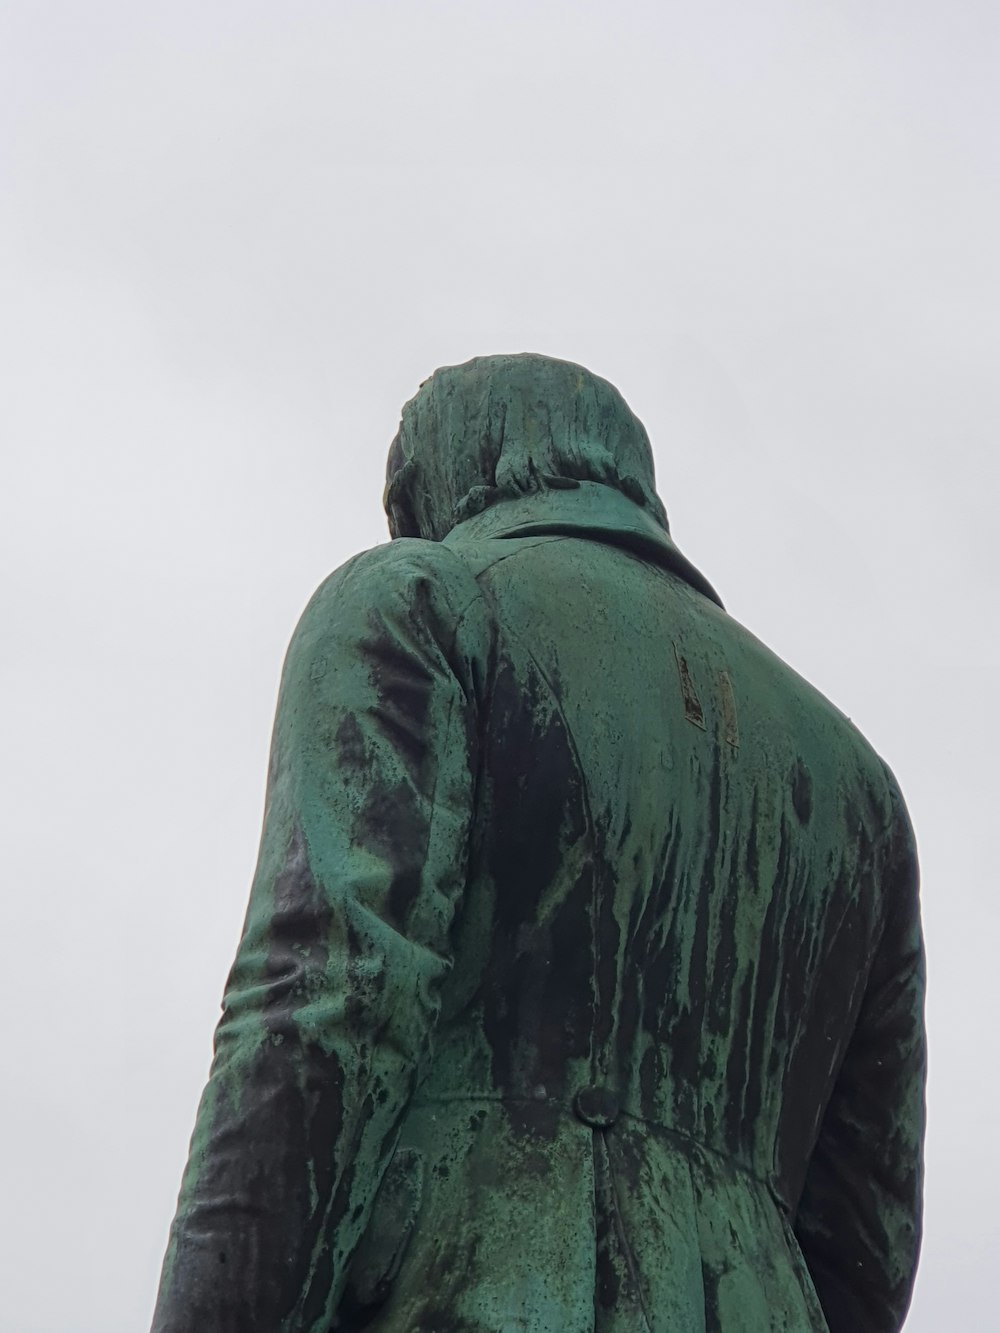 a statue of a person wearing a green coat